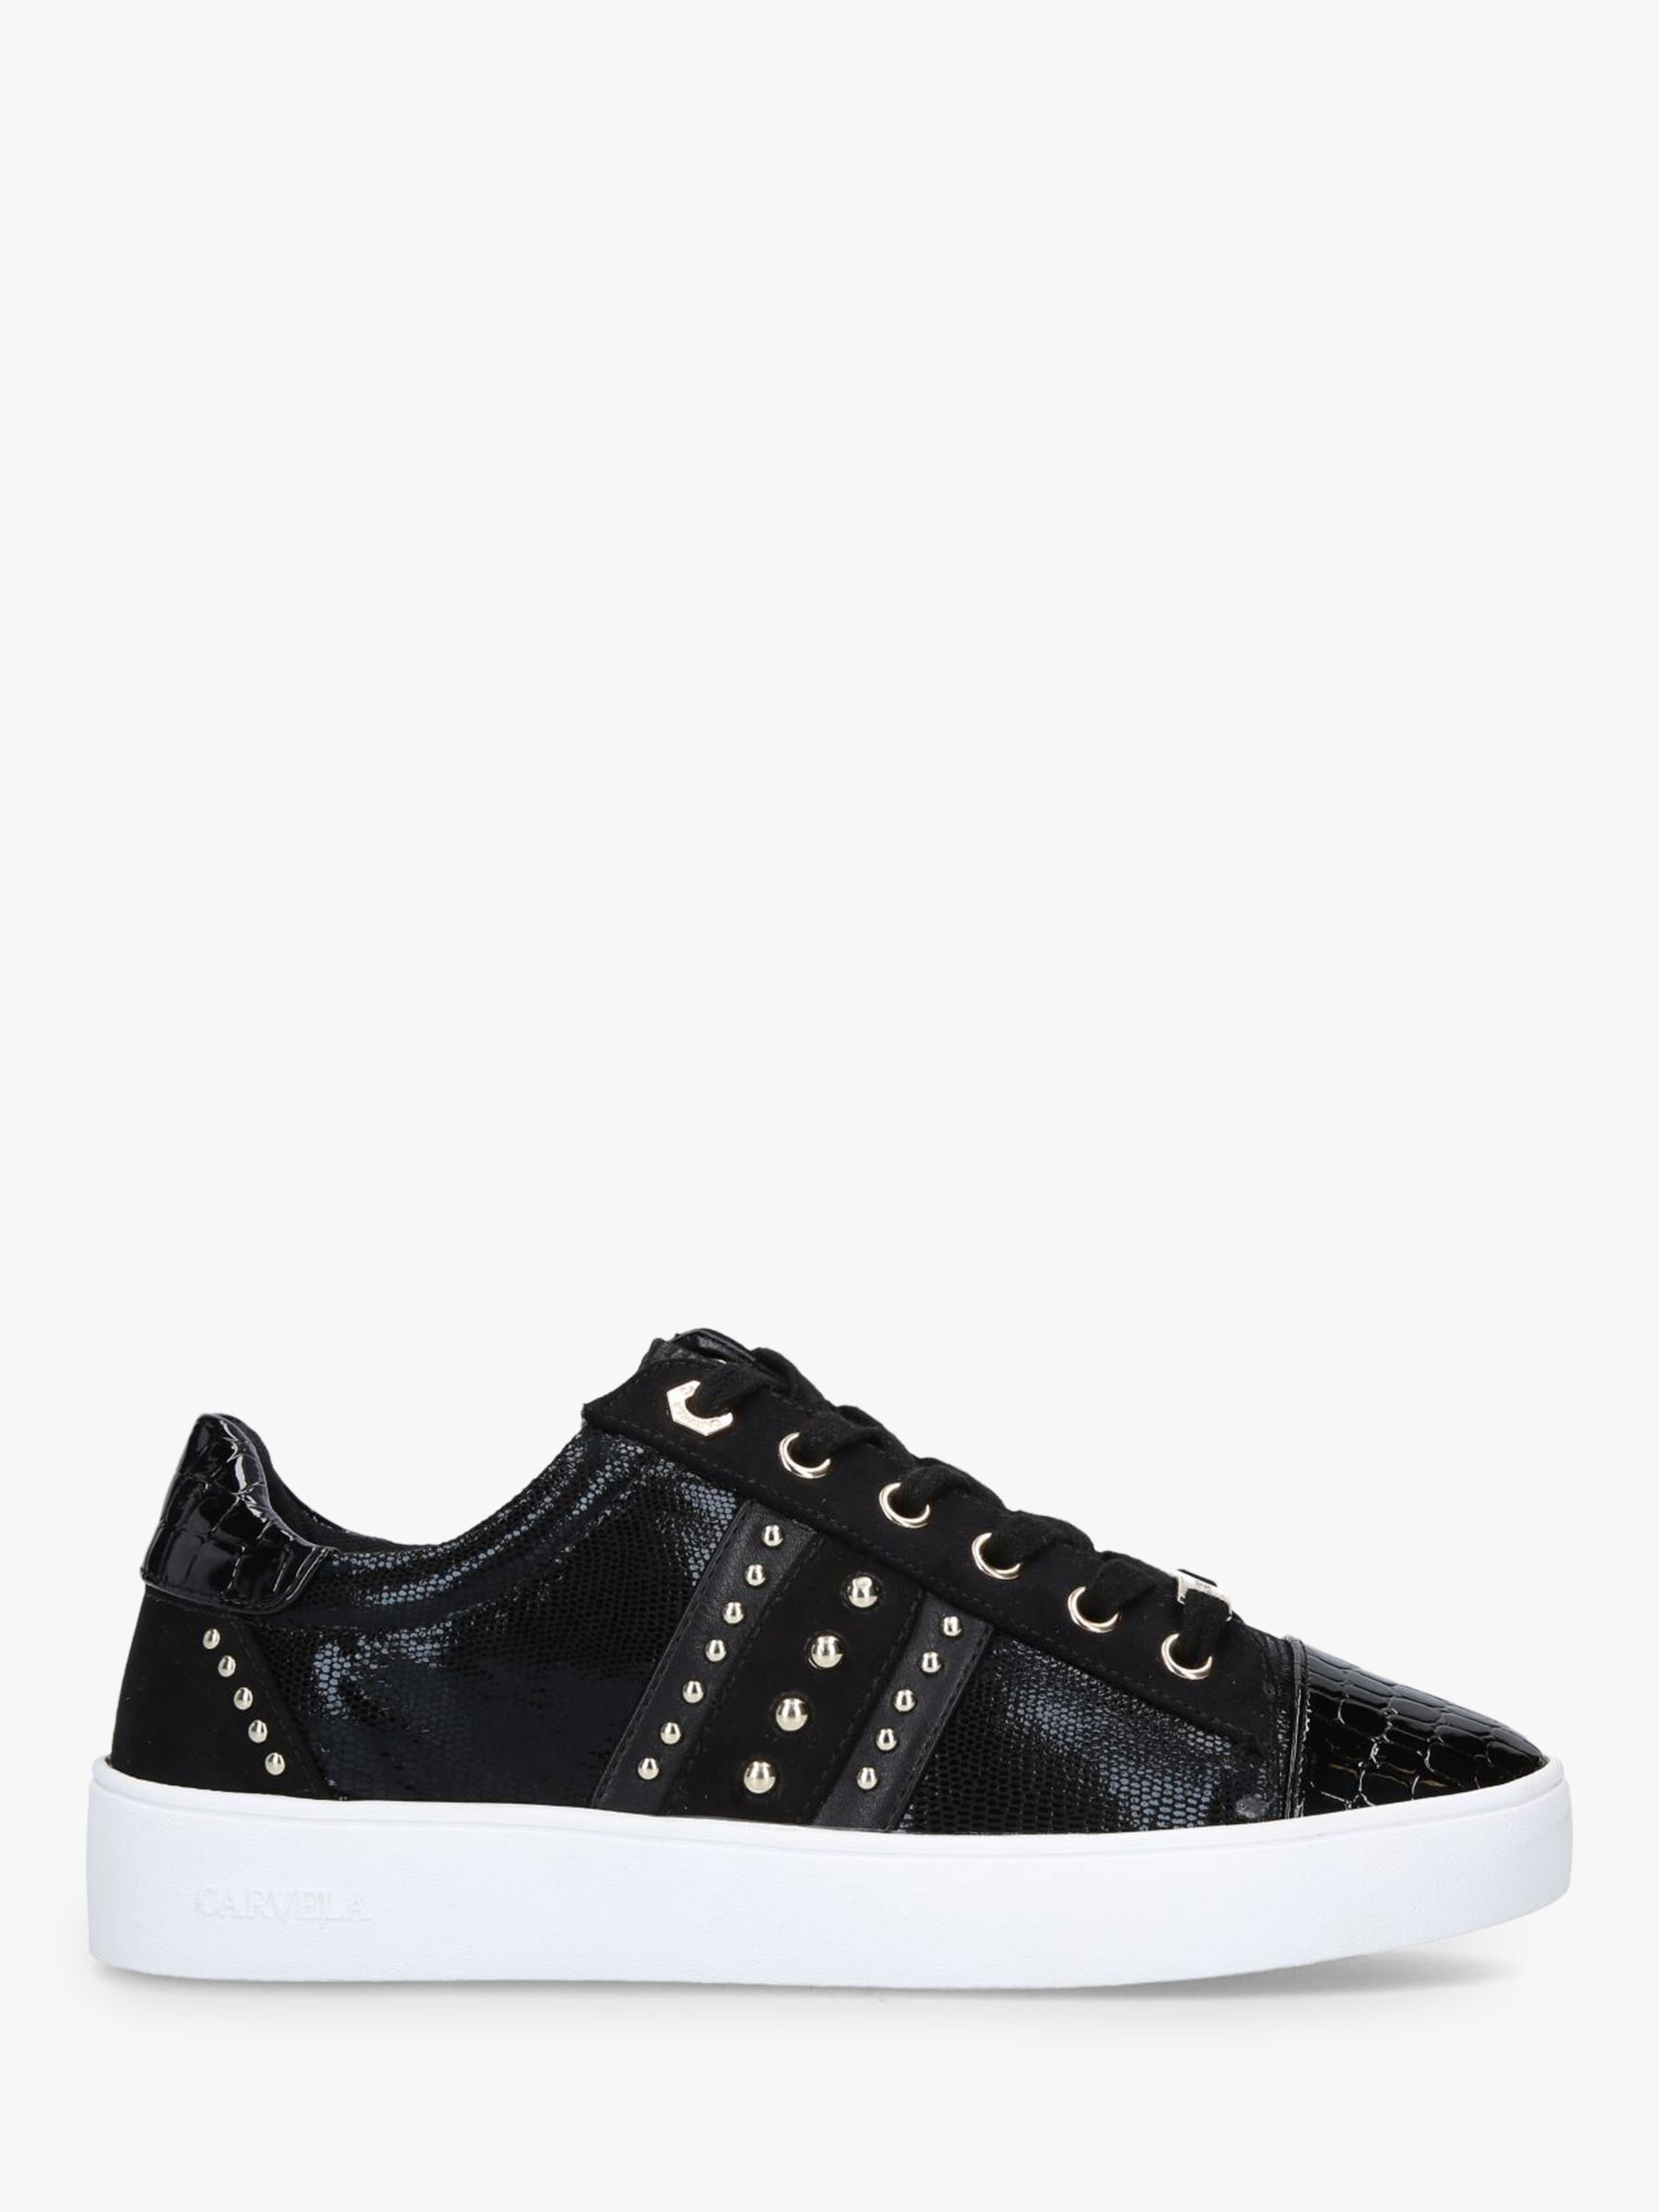 Carvela Jargon Studded Low Top Trainers 